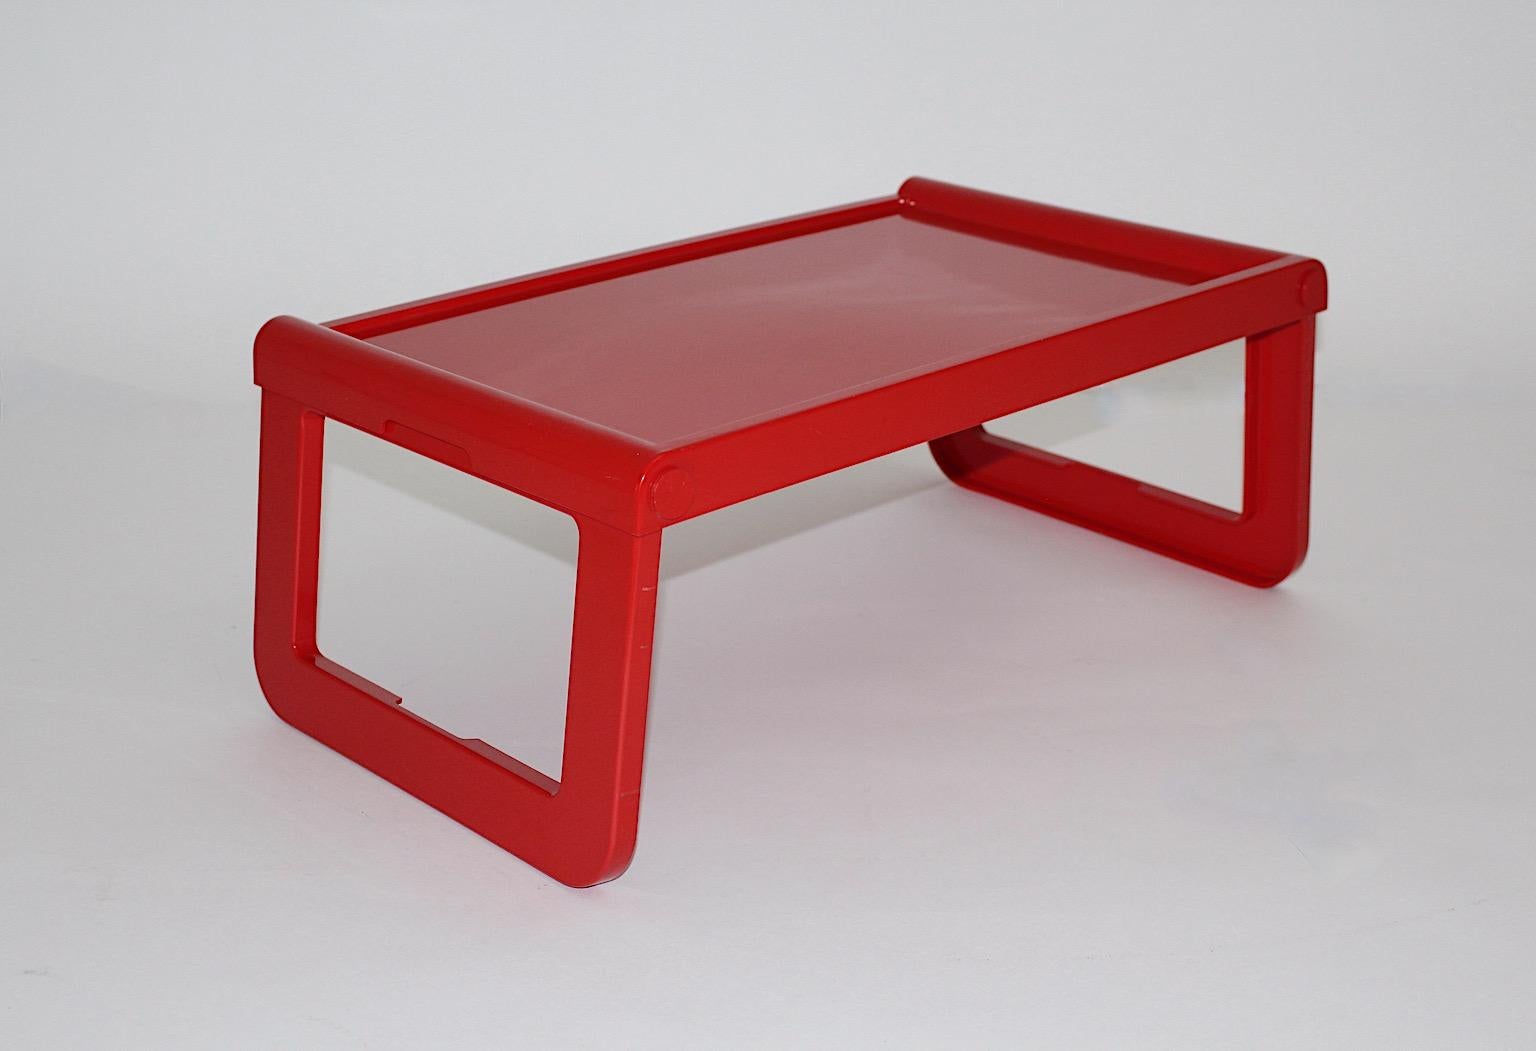 Space Age red vintage tray or breakfast table Model pepito from plastic designed by Luigi Massoni Grafico Studio Zeto for Guzzini 1970s Italy.
Perfect to use as foldable breakfast bed table or tray or as computer table. This small table shows a